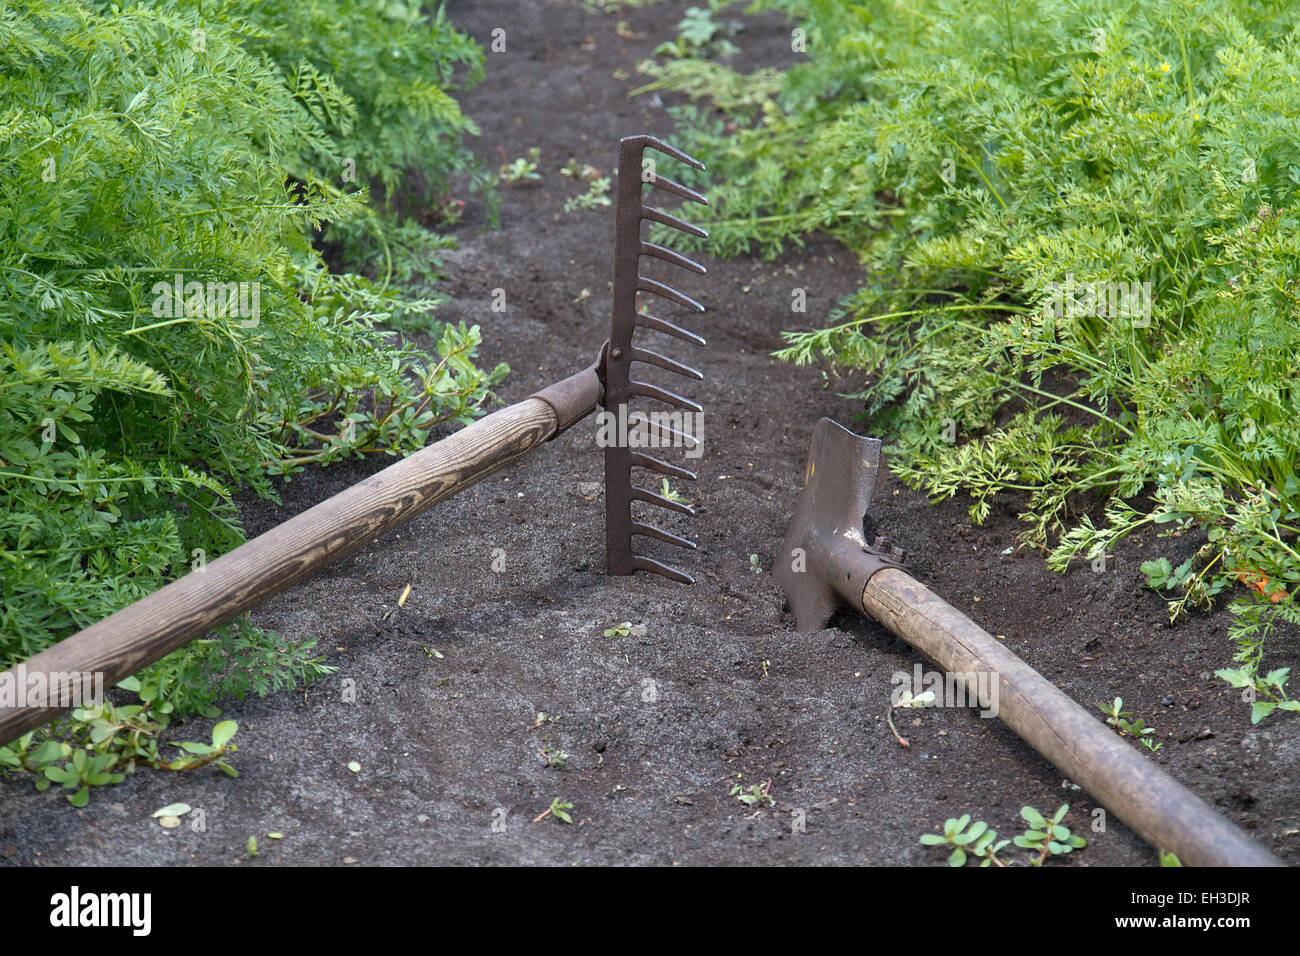 Shovel and rake lie between the vegetable beds Stock Photo